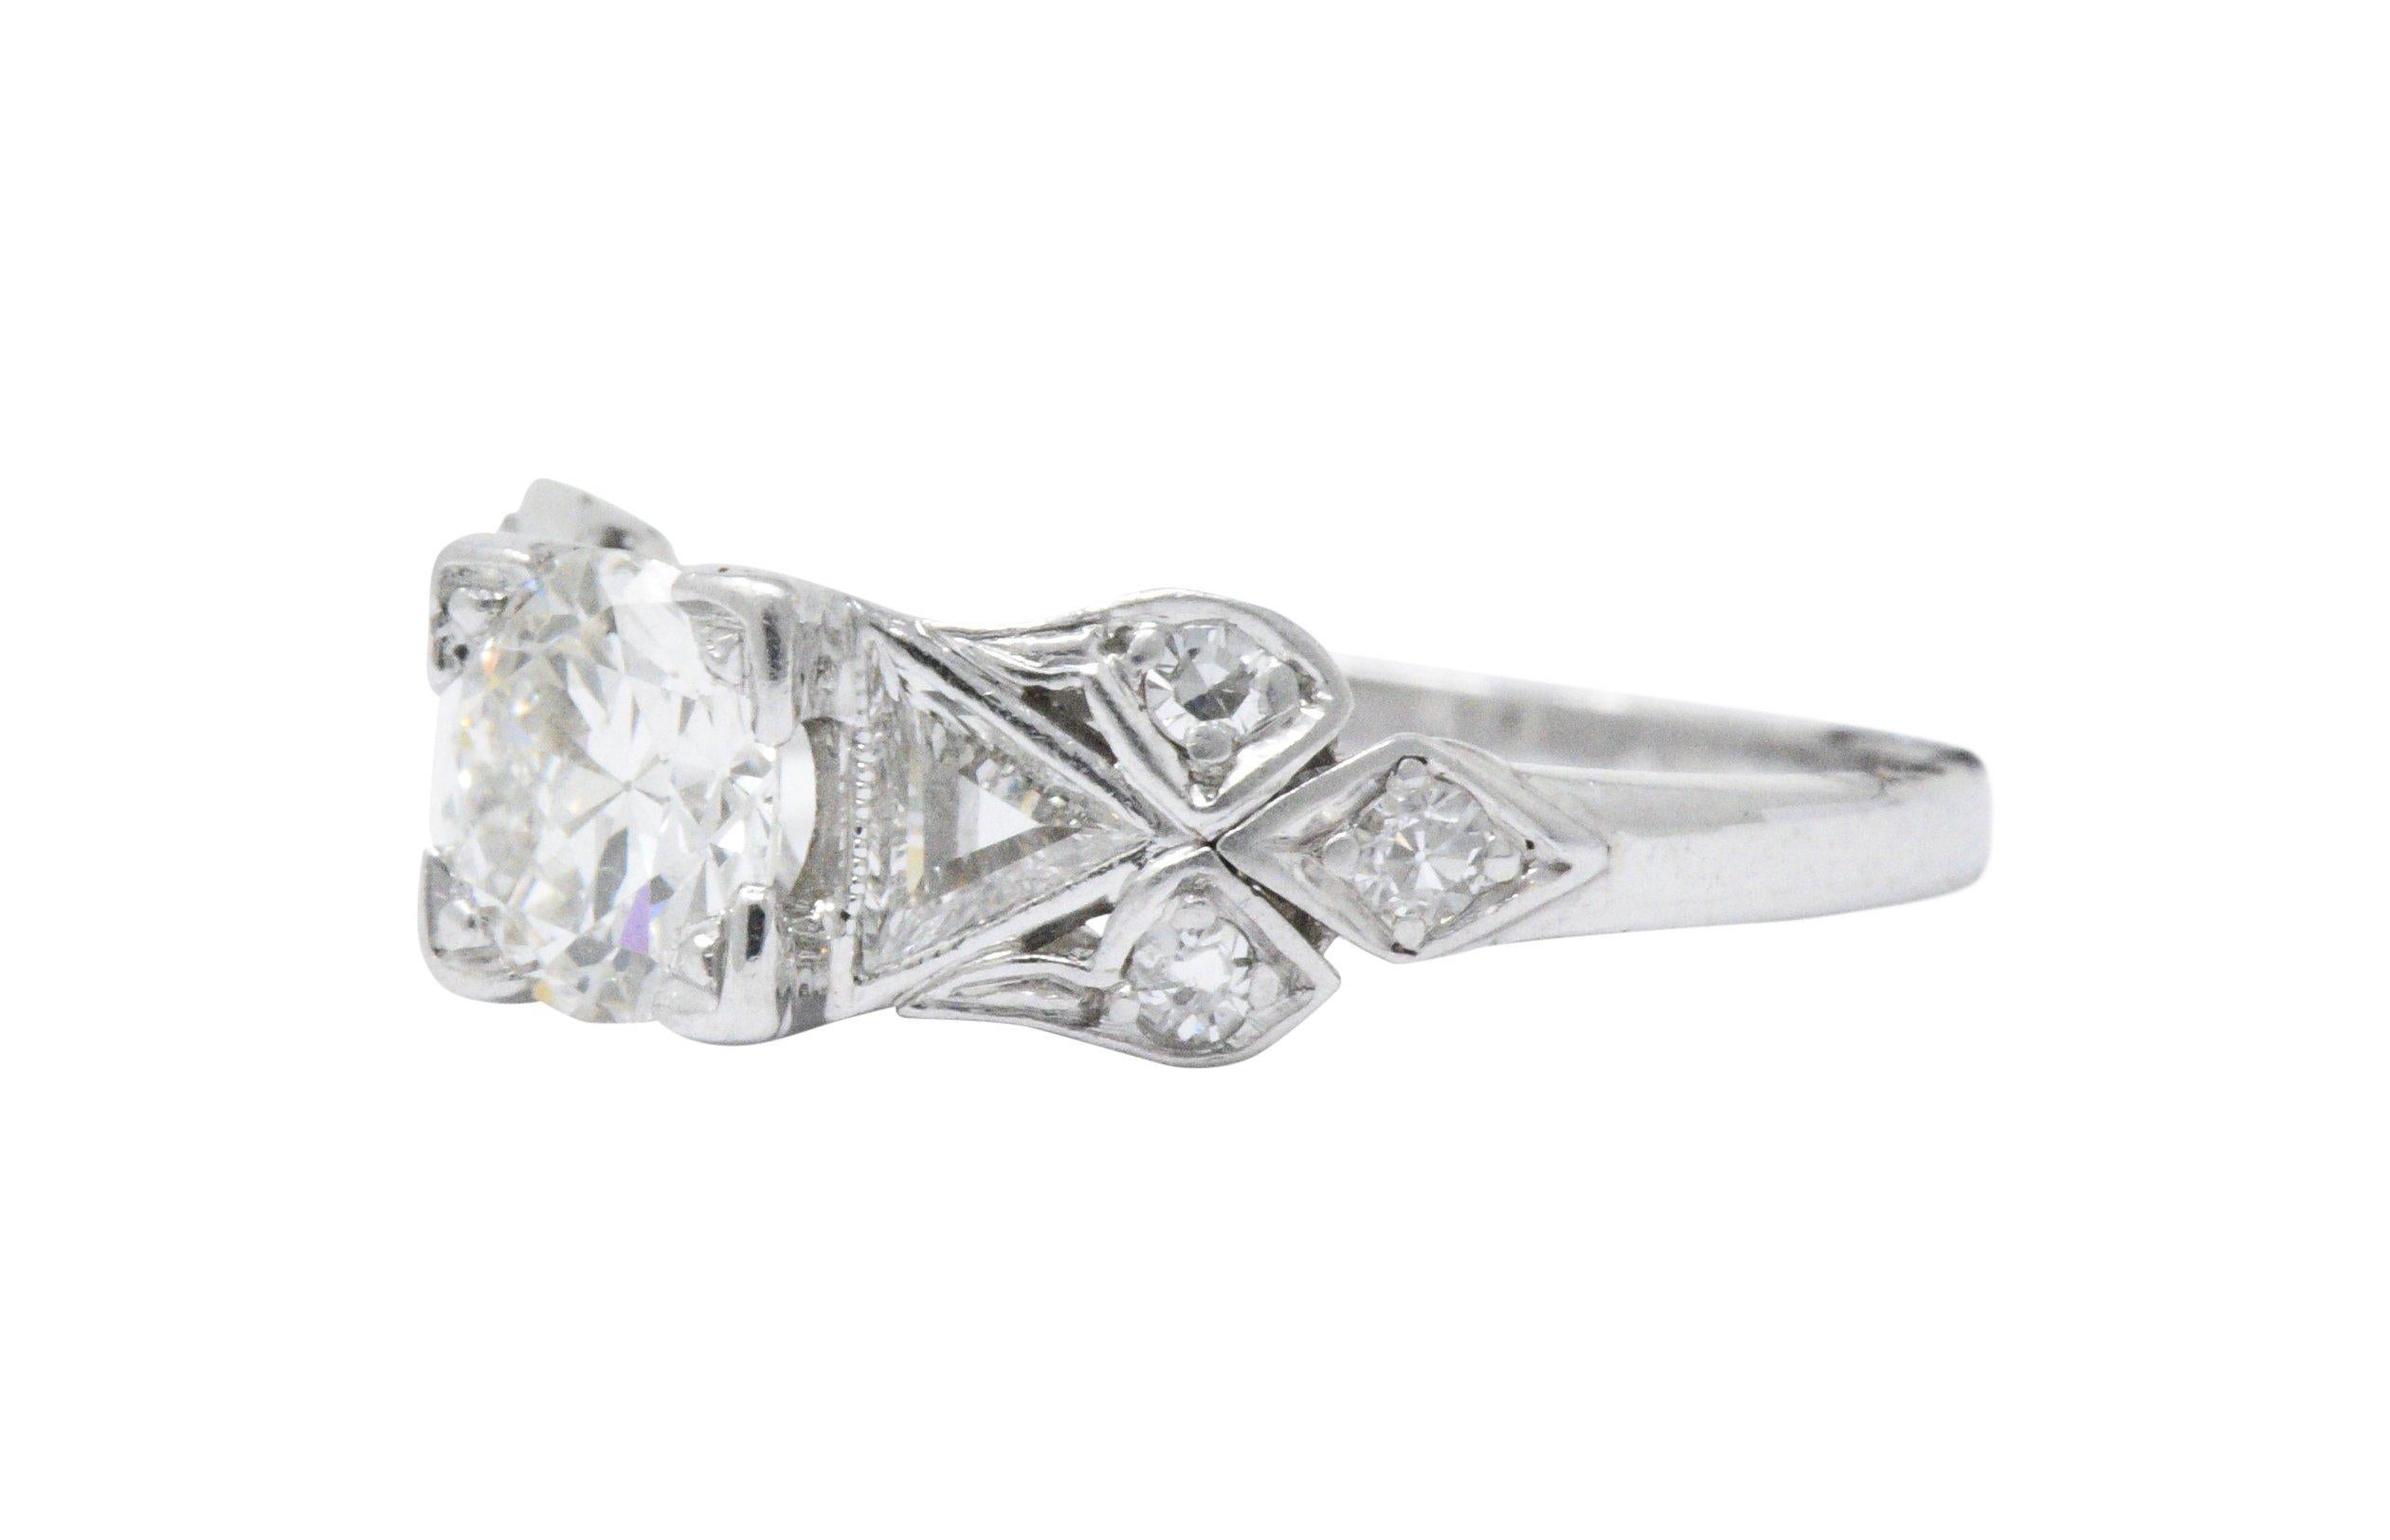 This is an Art Deco platinum and diamond engagement ring. The stunning filigree platinum mounting is circa 1935. The center old European cut diamond weighs approximately 0.73 carat, H color and SI1 clarity. Accenting the center stone are two